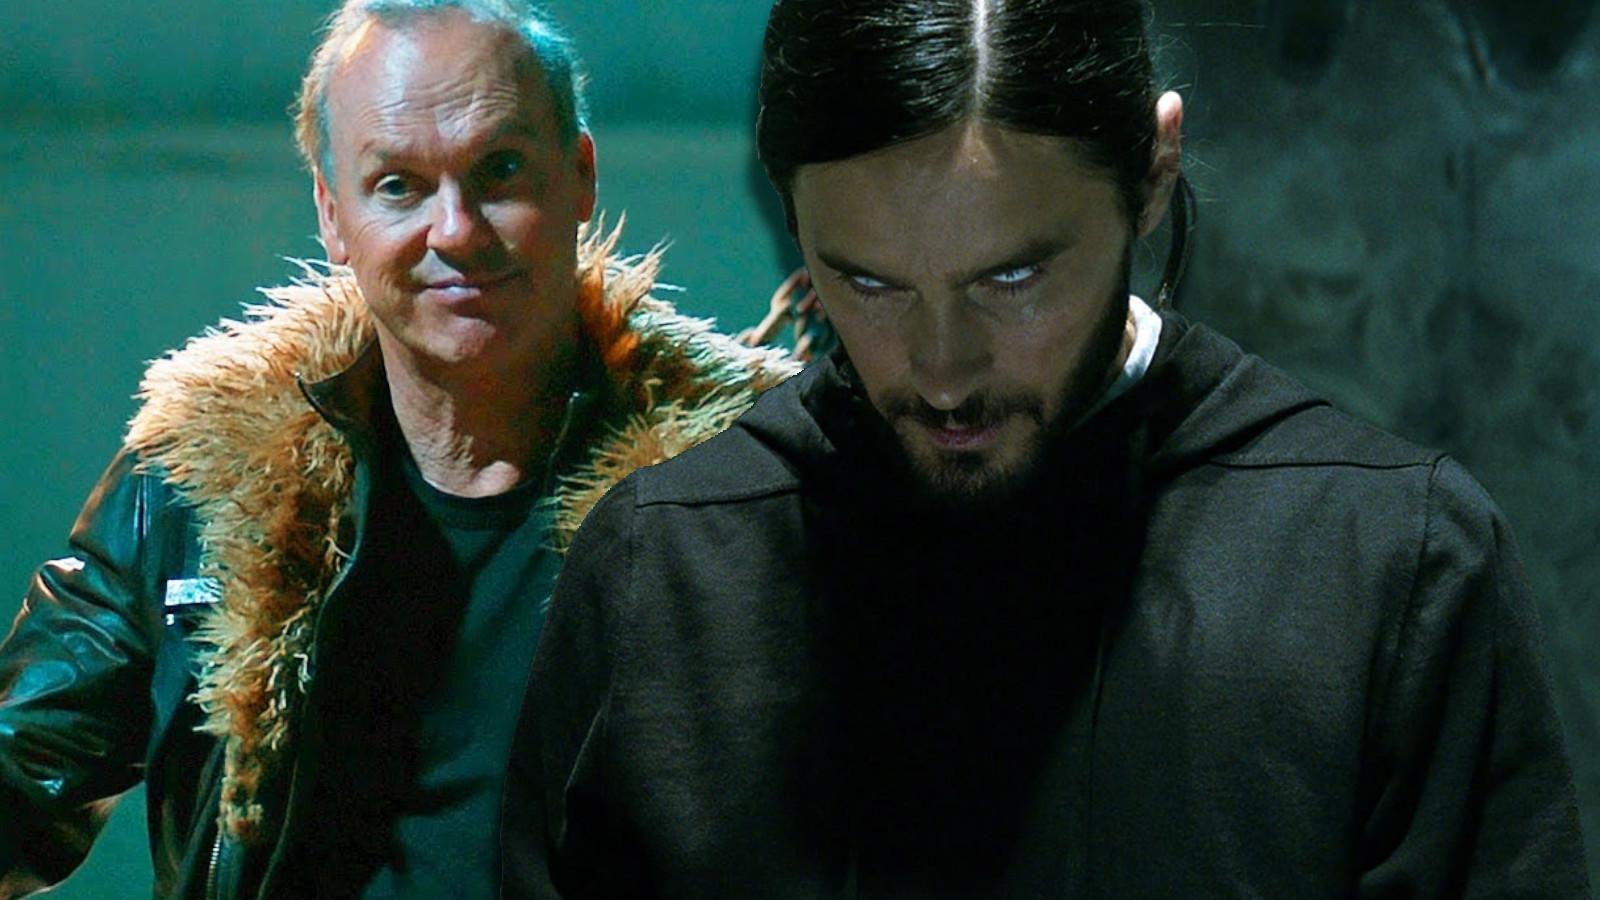 Michael Keaton as The Vulture and Jared Leto as Morbius